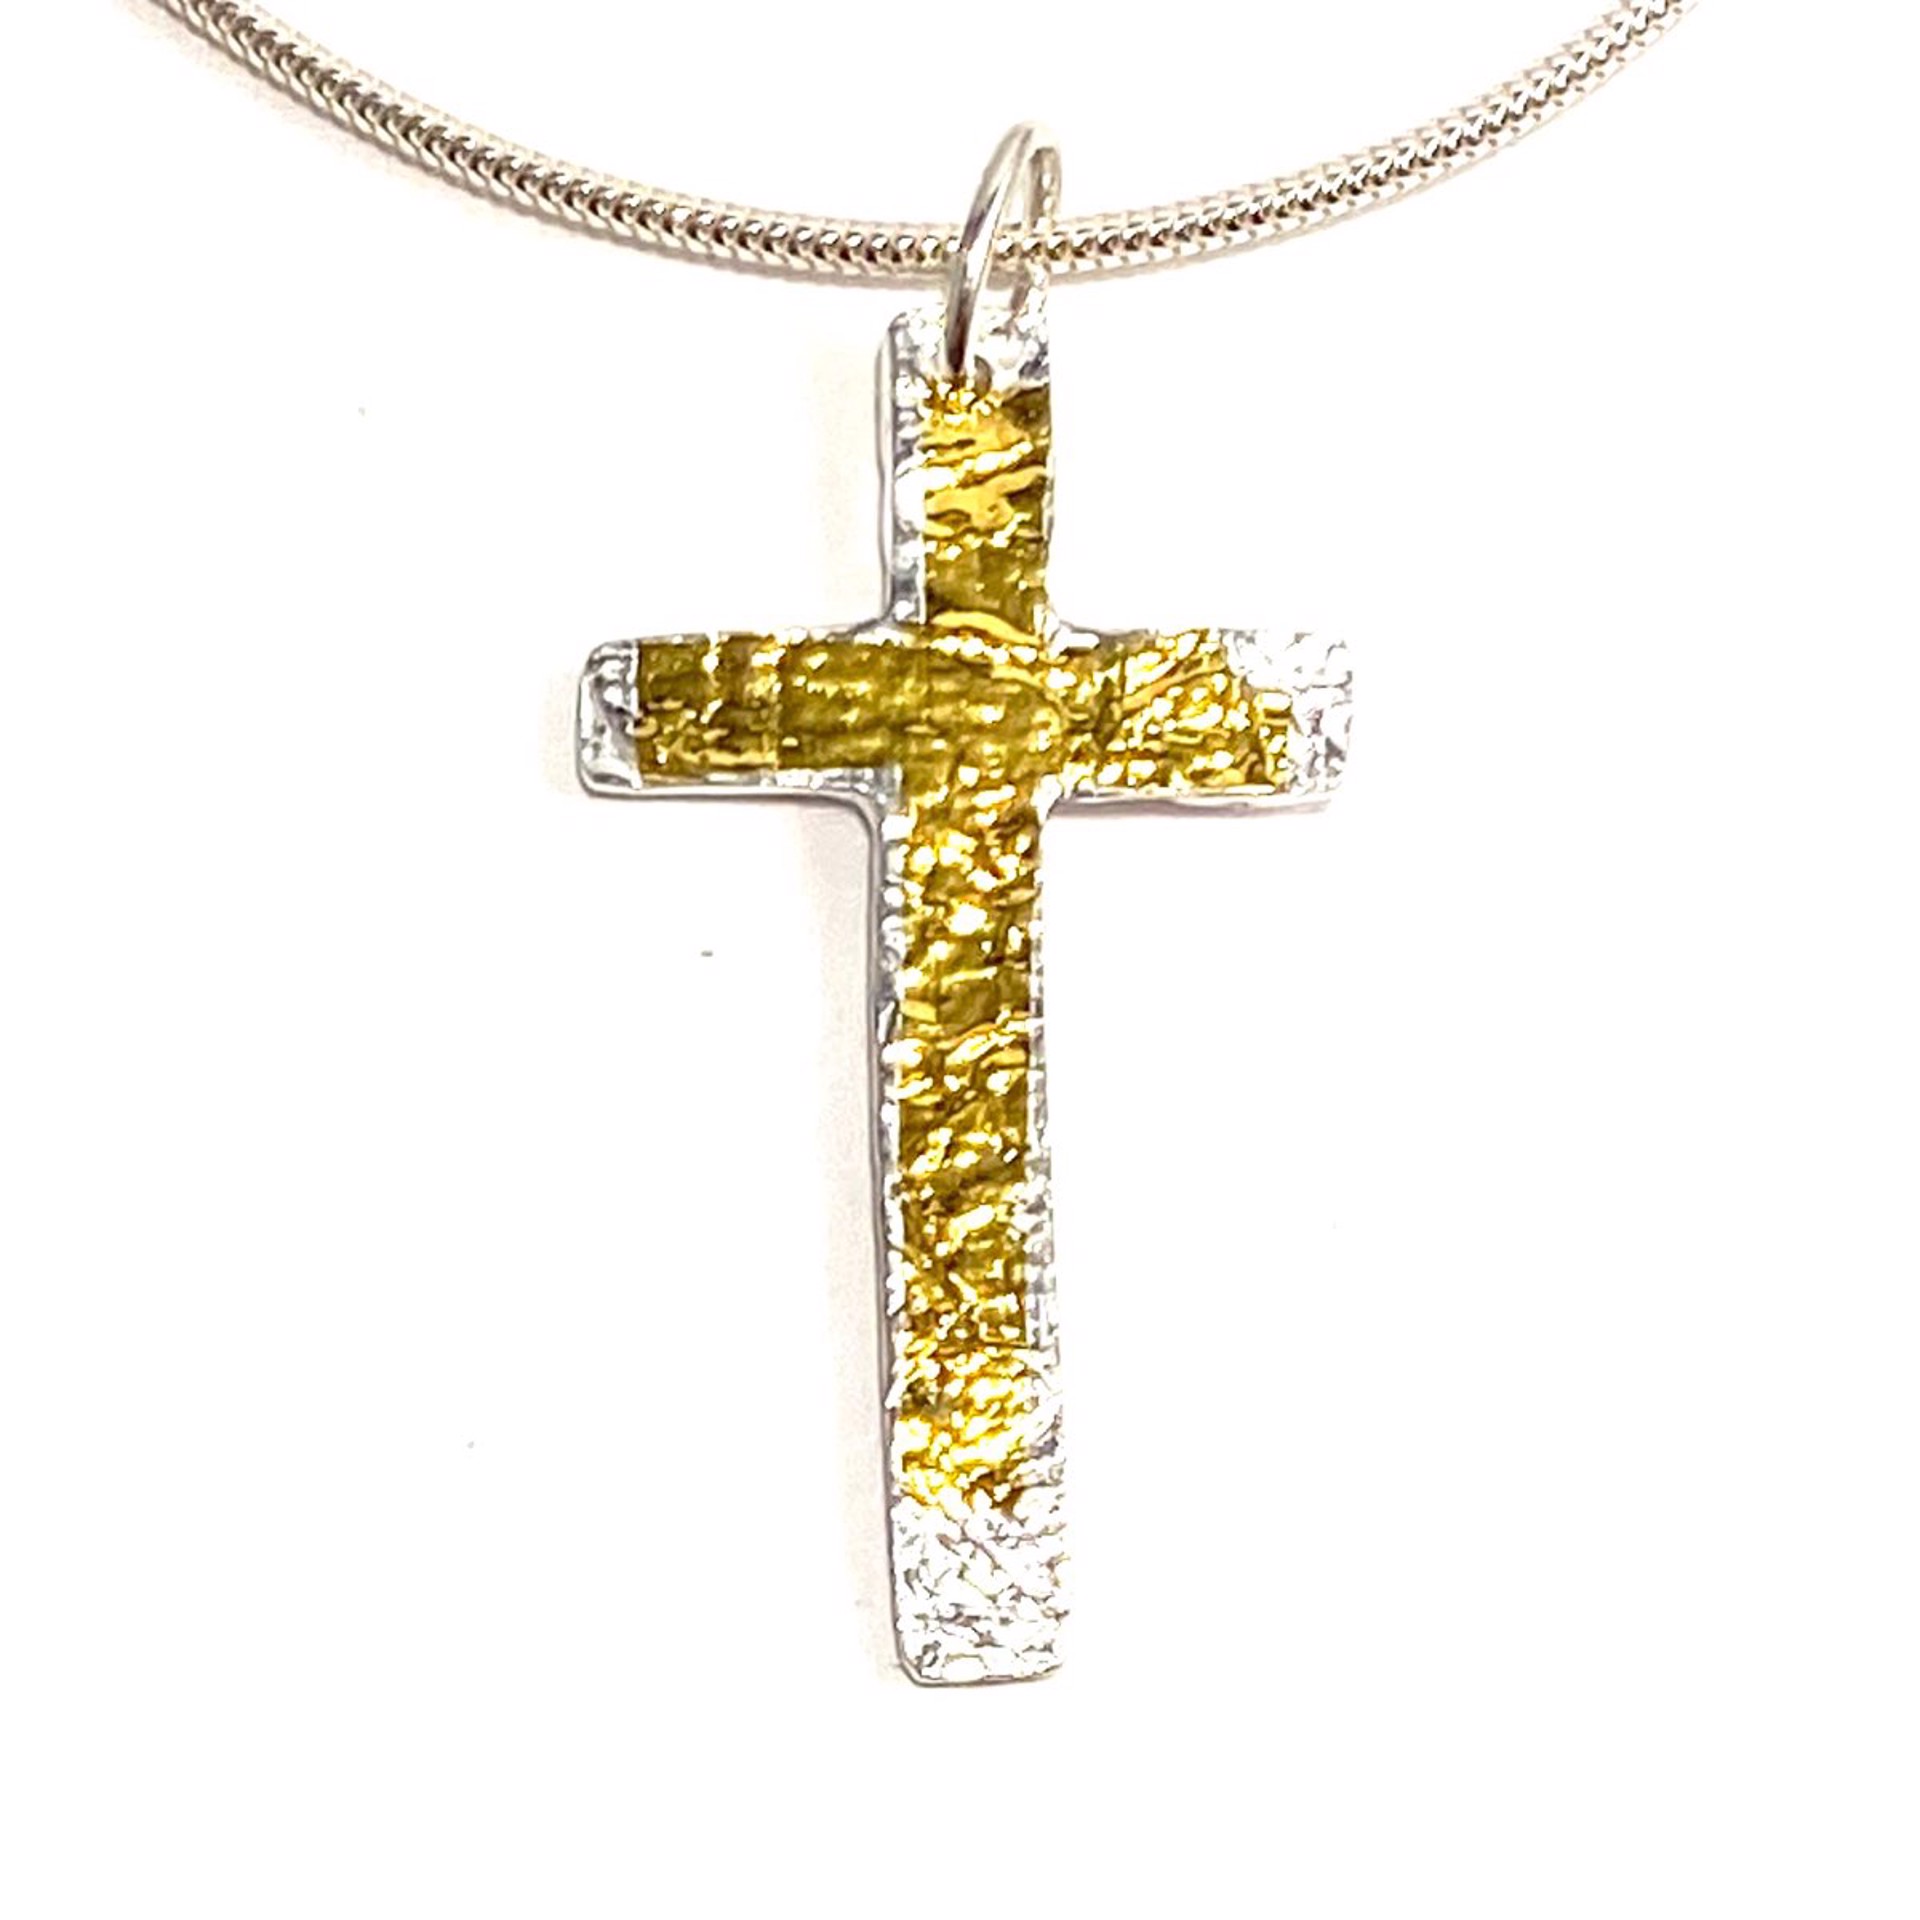 KH22-70 Keum-Boo Fine Silver and Gold Reversible Cross Necklace by Karen Hakim